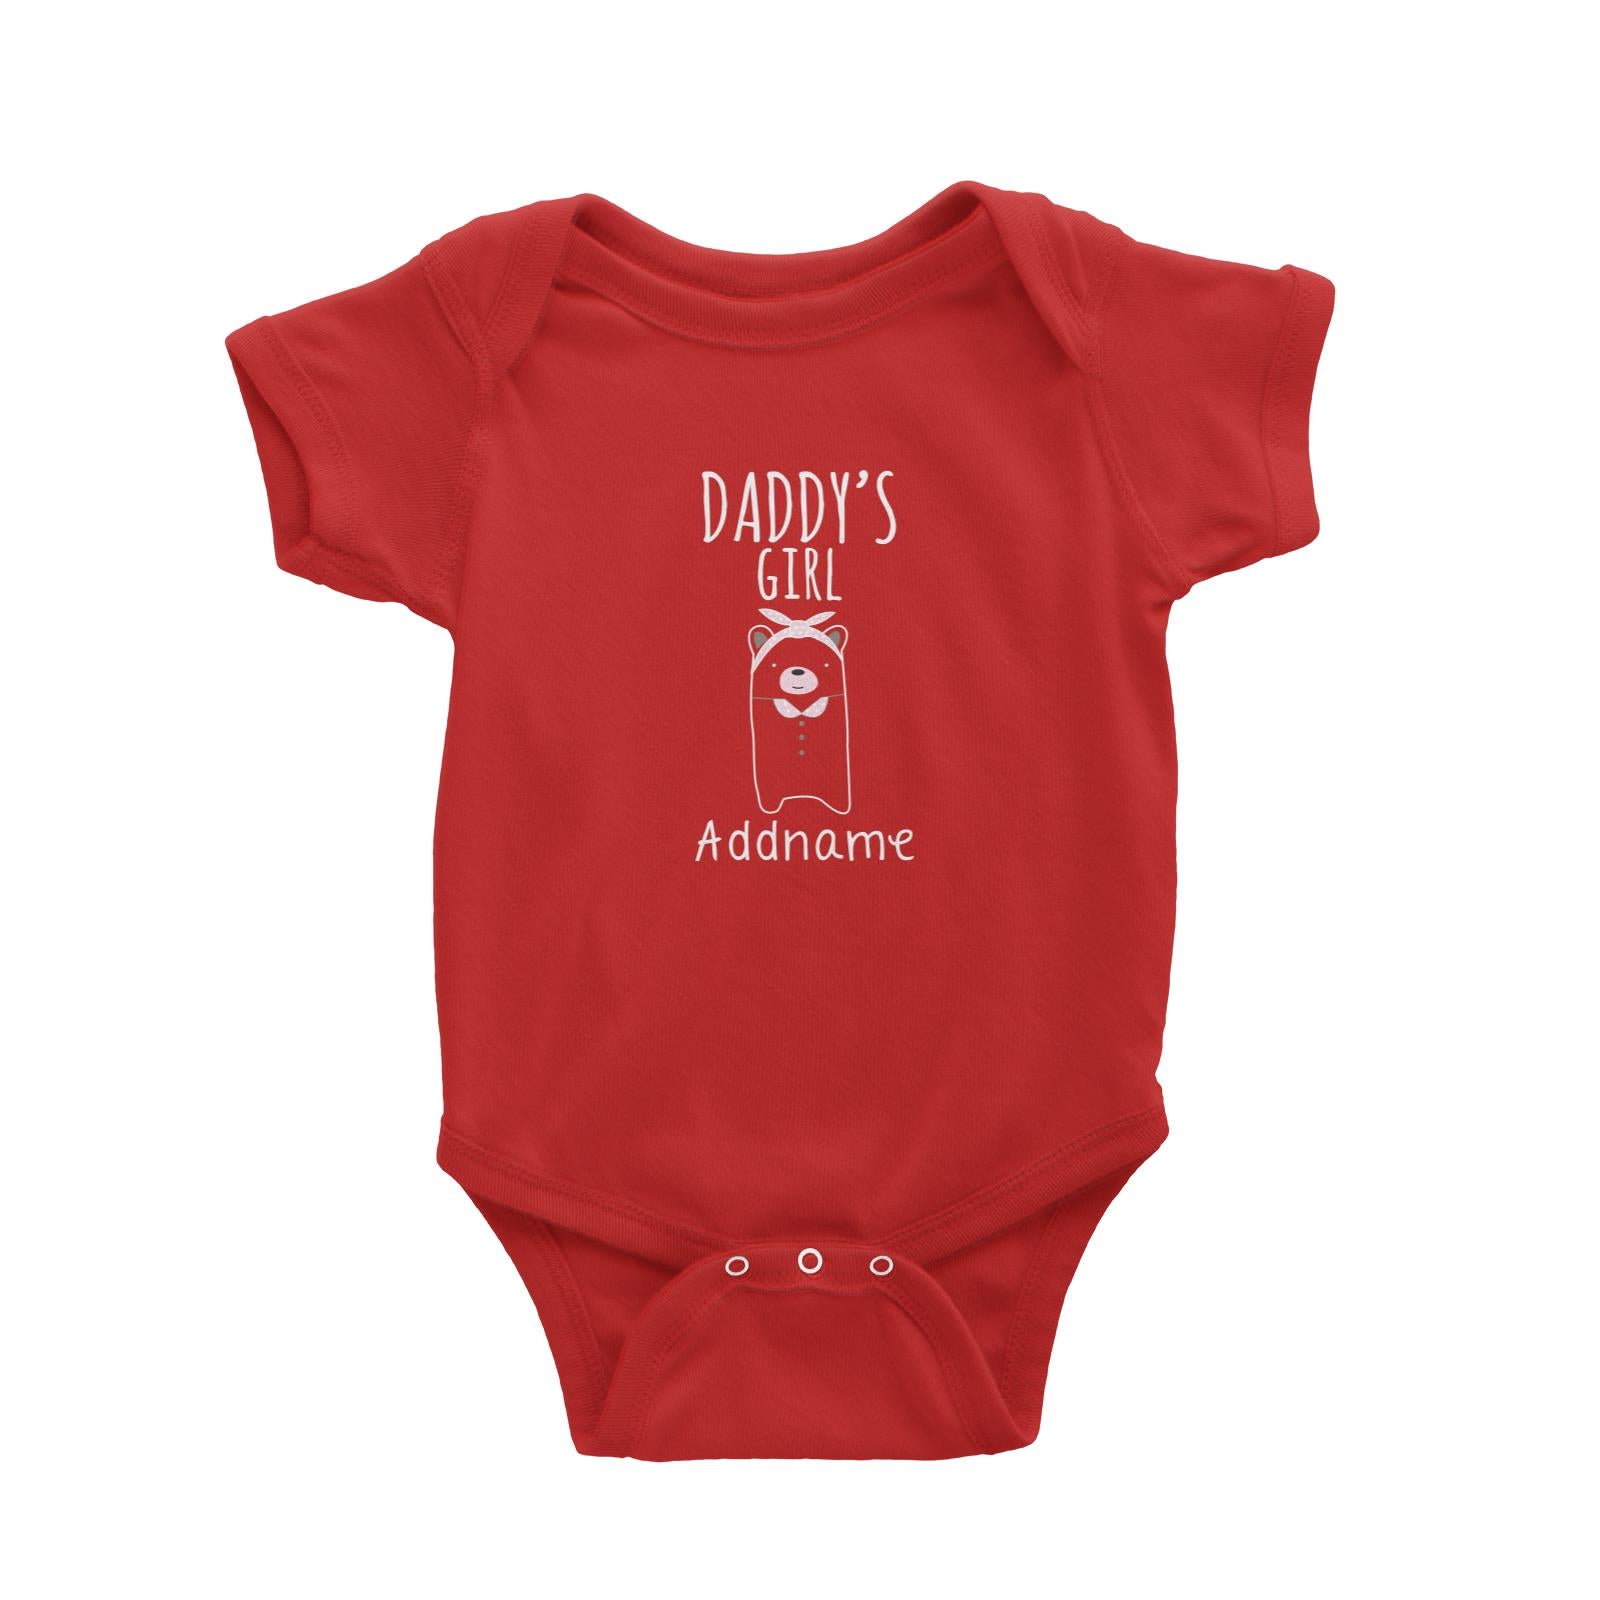 Cute Animals and Friends Series 2 Bear Daddy's Girl Addname Baby Romper